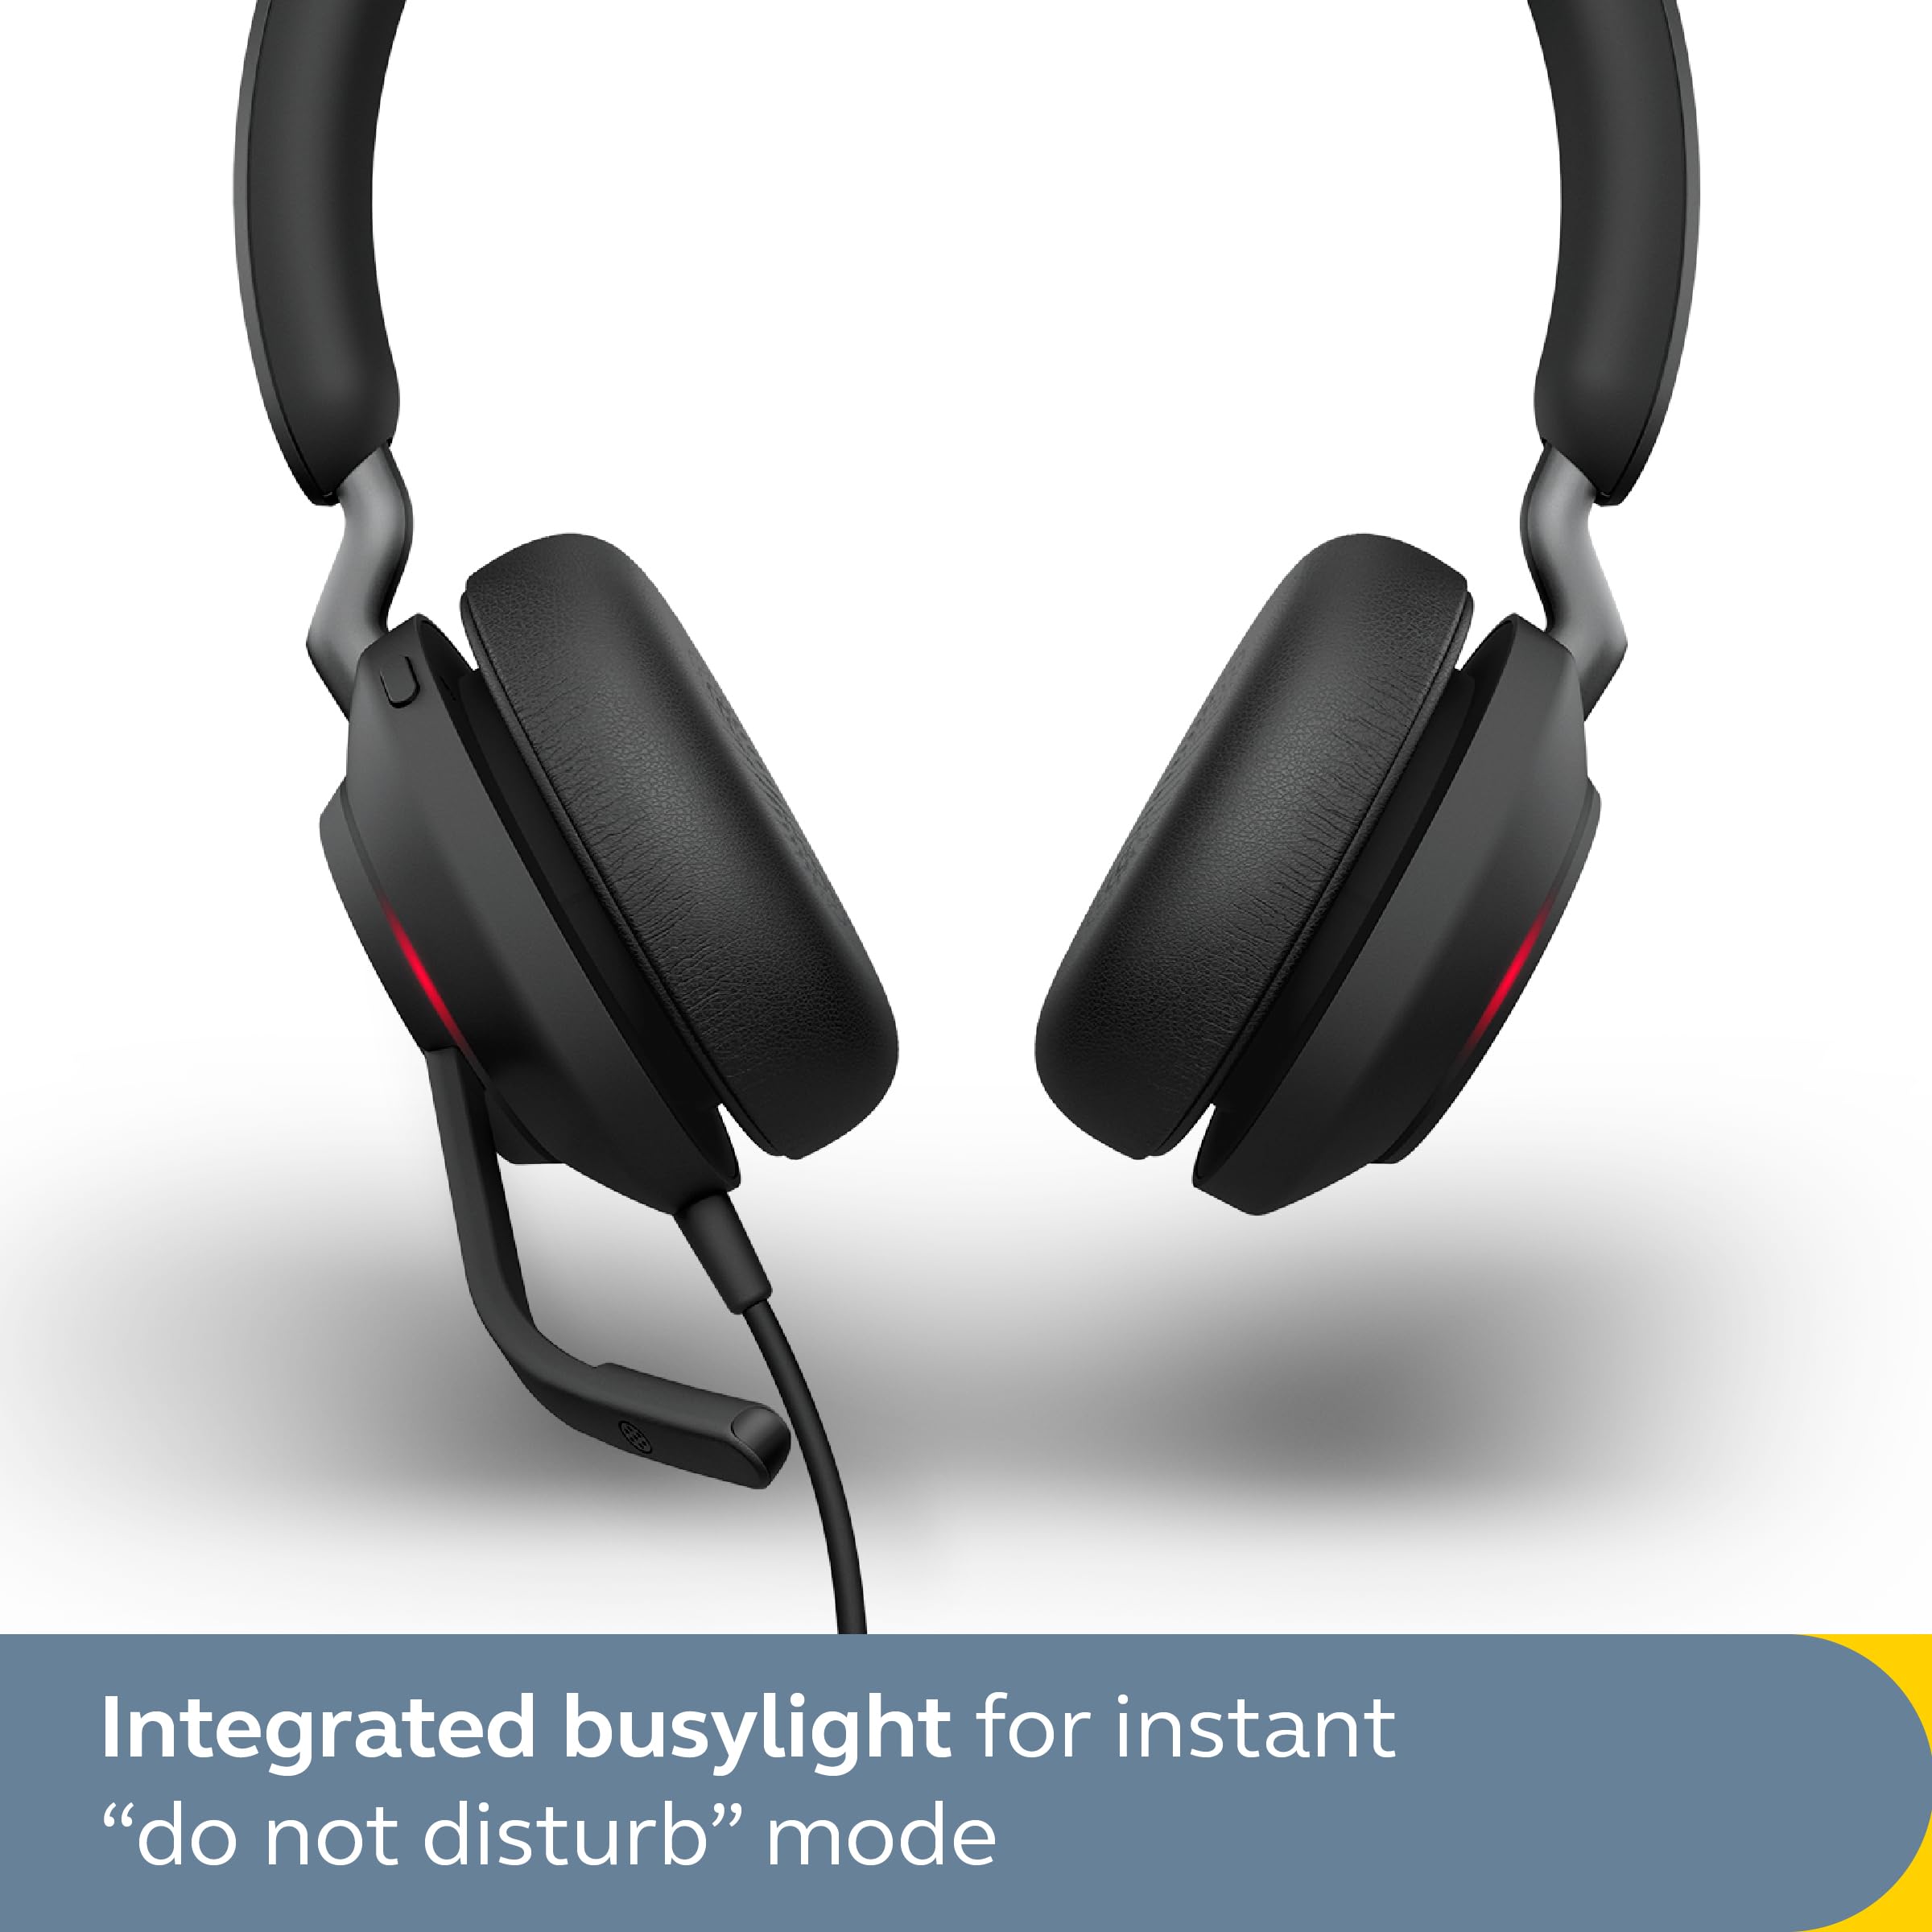 Jabra Evolve2 40 SE Wired Stereo Noise-Cancelling Headset - Features 3-Microphone Call Technology and USB-C Cable - MS Teams Certified, Works with All Other Platforms - Black